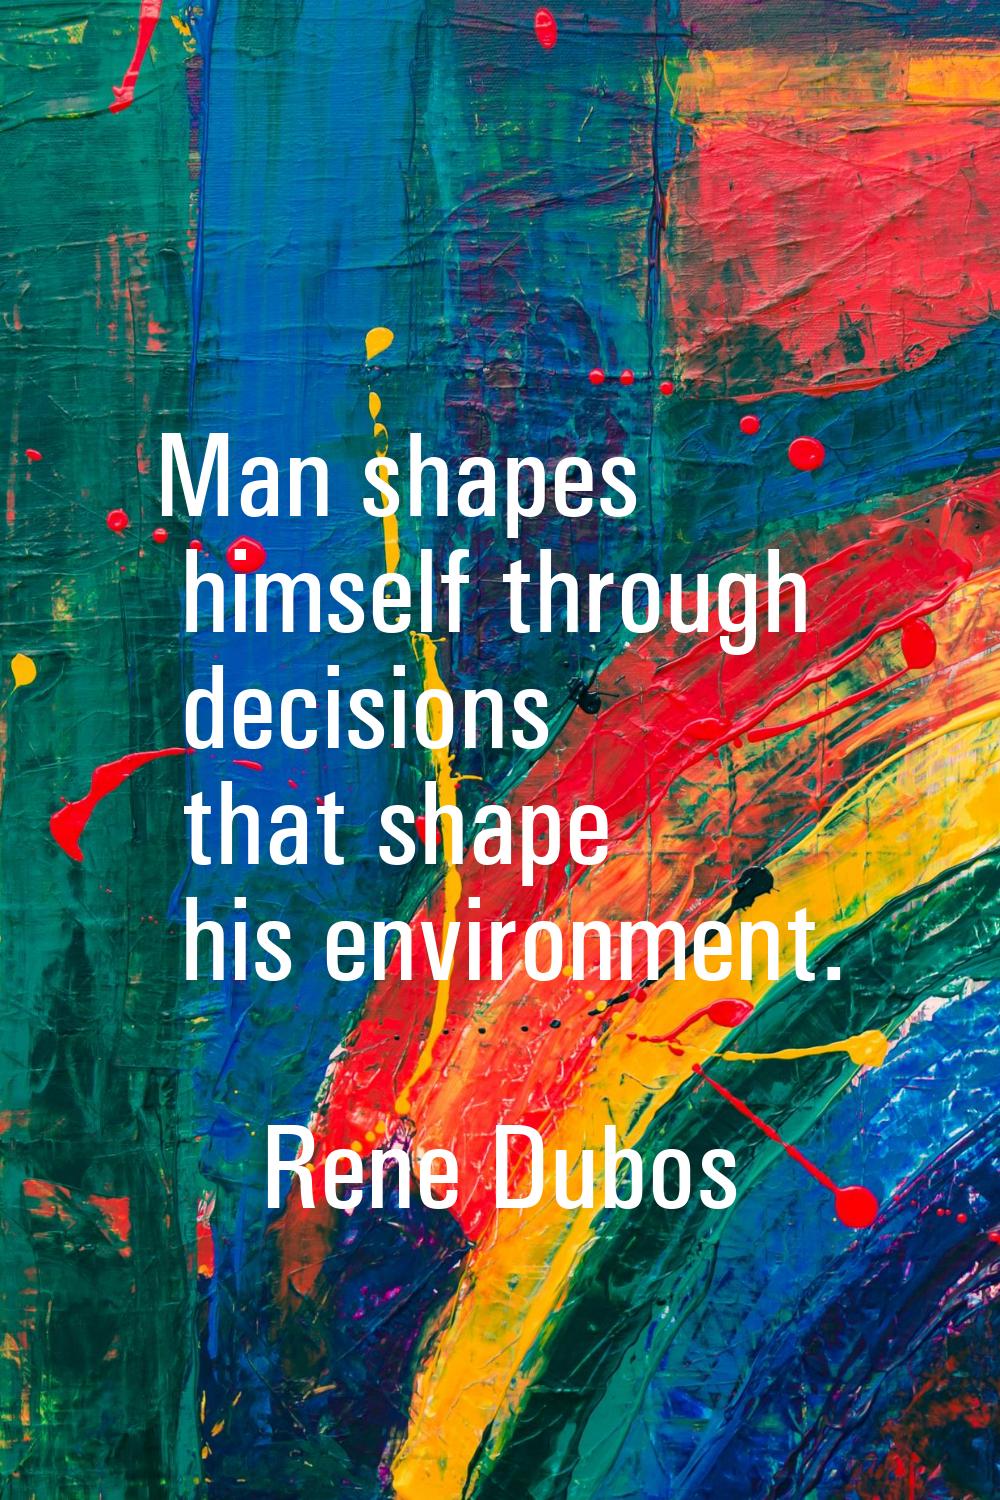 Man shapes himself through decisions that shape his environment.